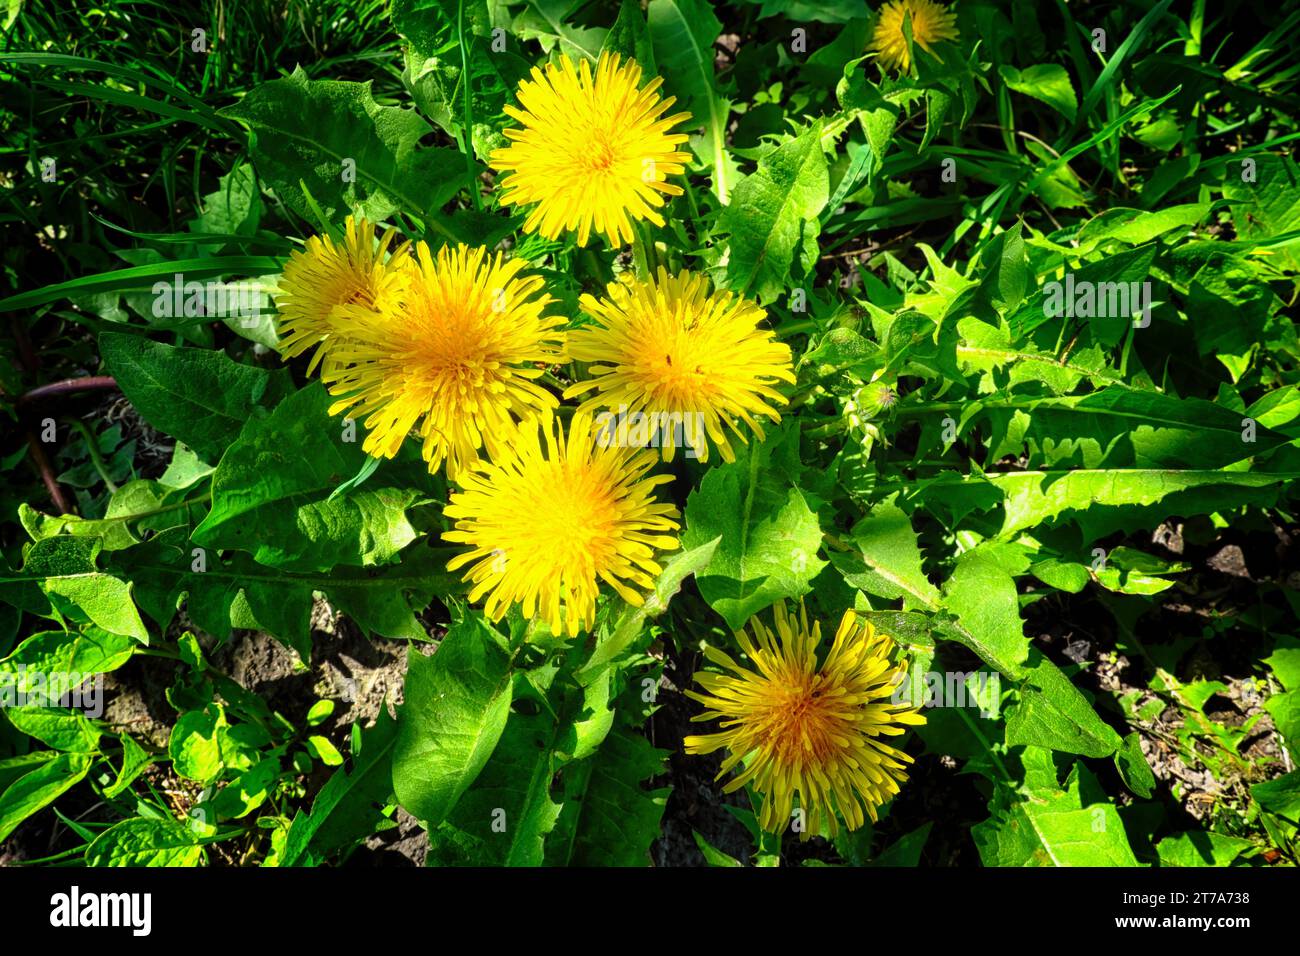 The splendor of spring is on display as a group of dandelions rises above a lush green meadow, their vibrant yellow petals shining with the season's j Stock Photo